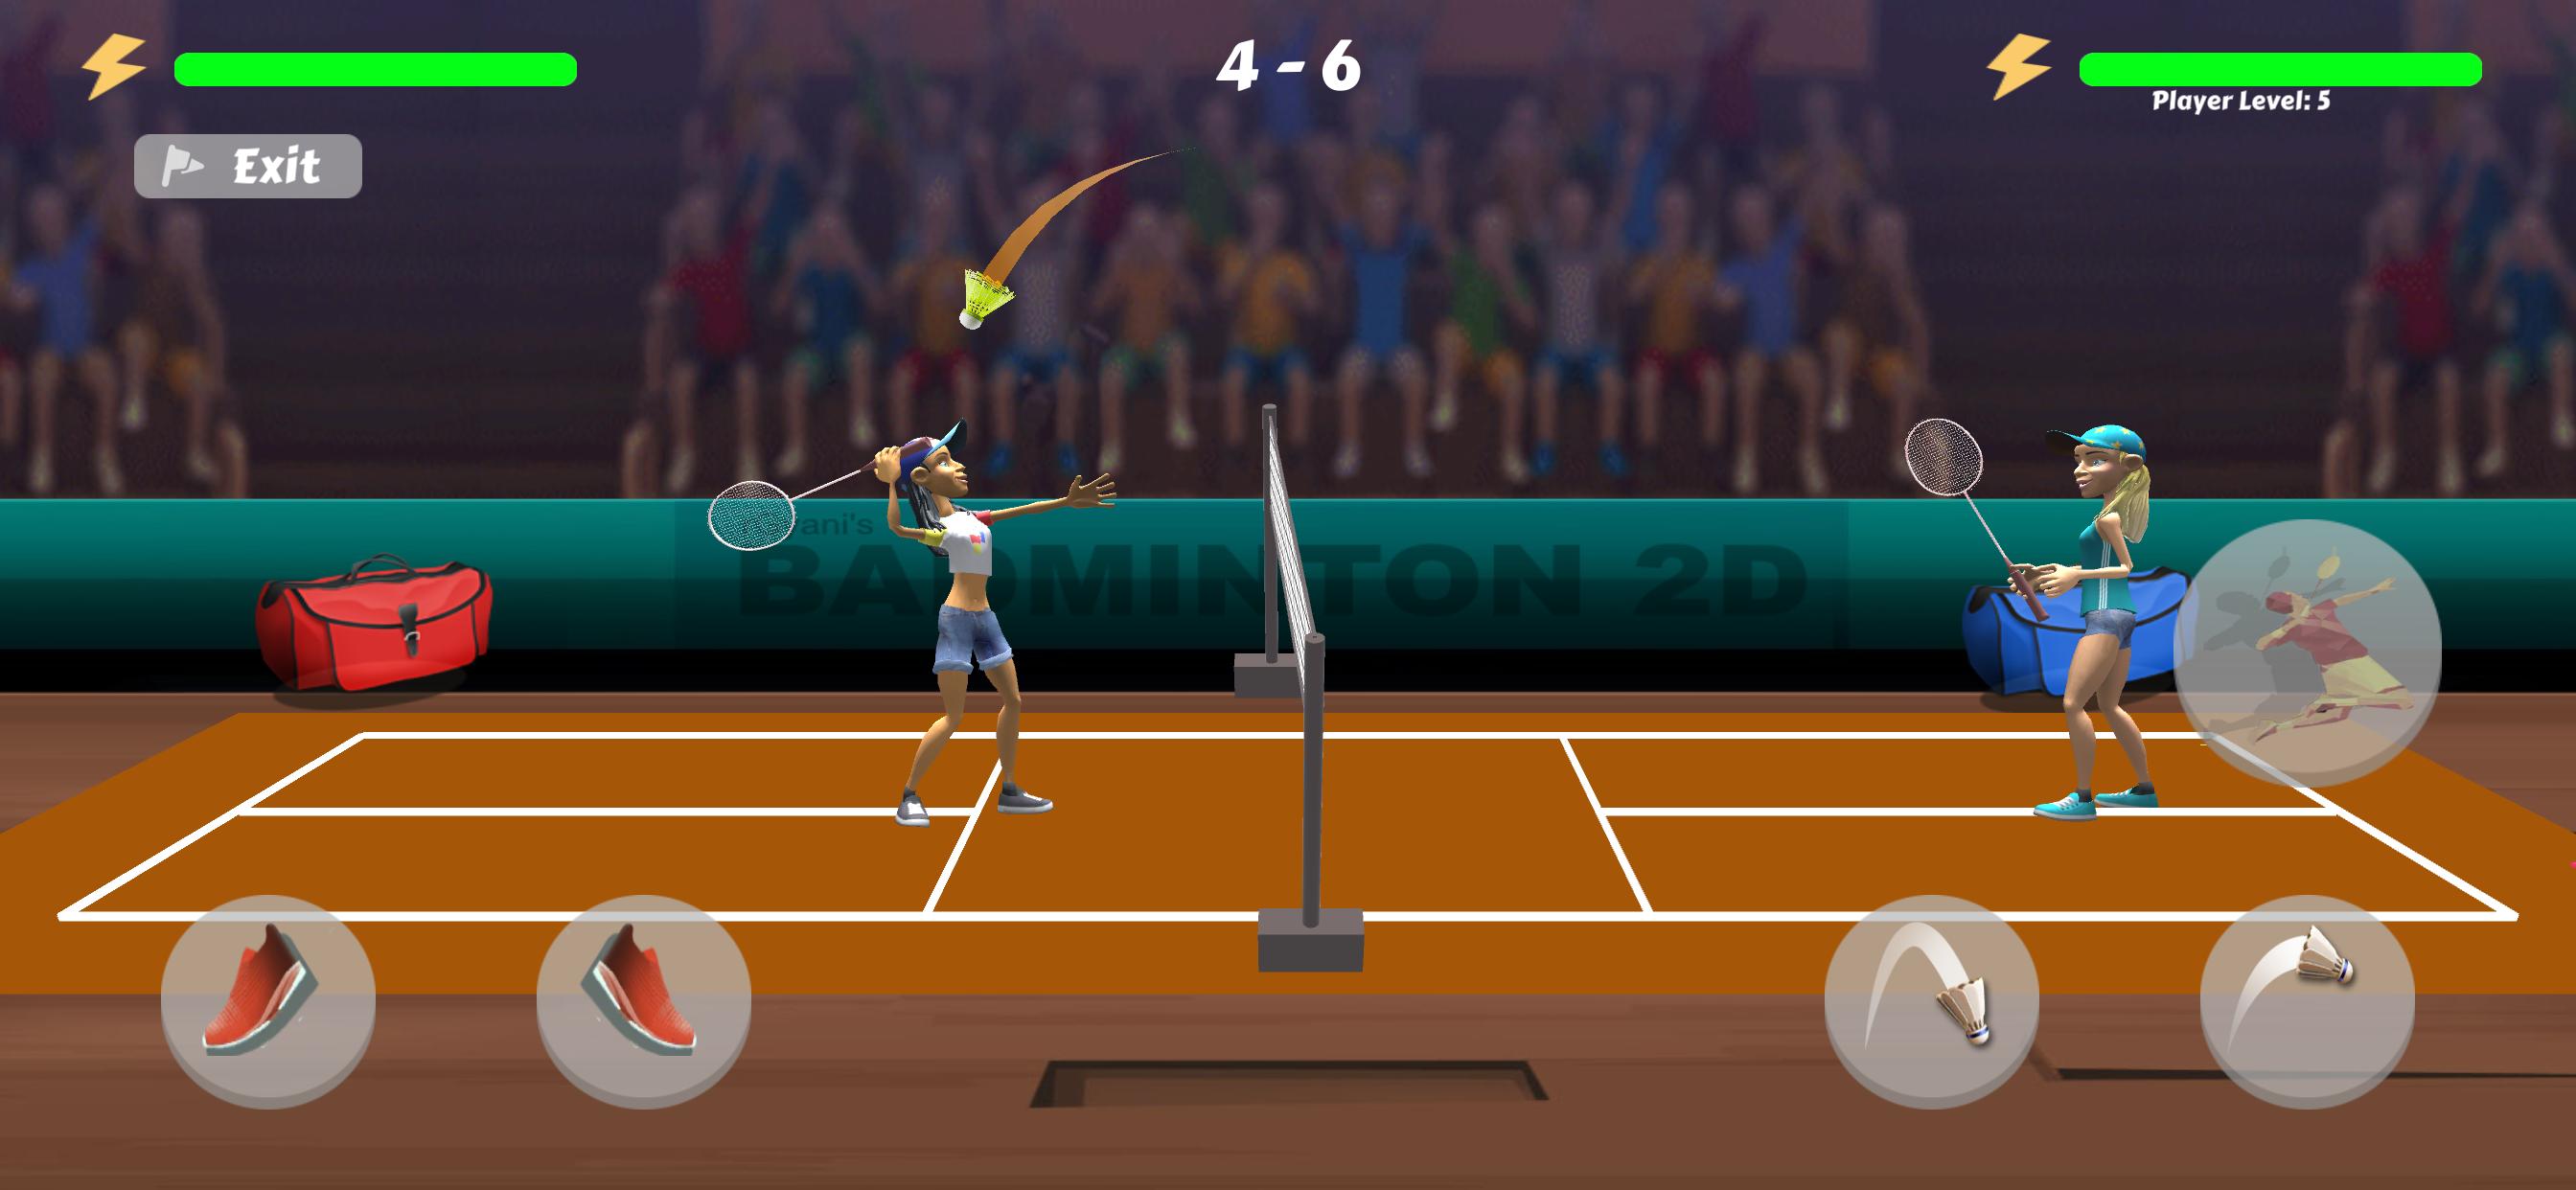 Badminton 2D for Android - APK Download